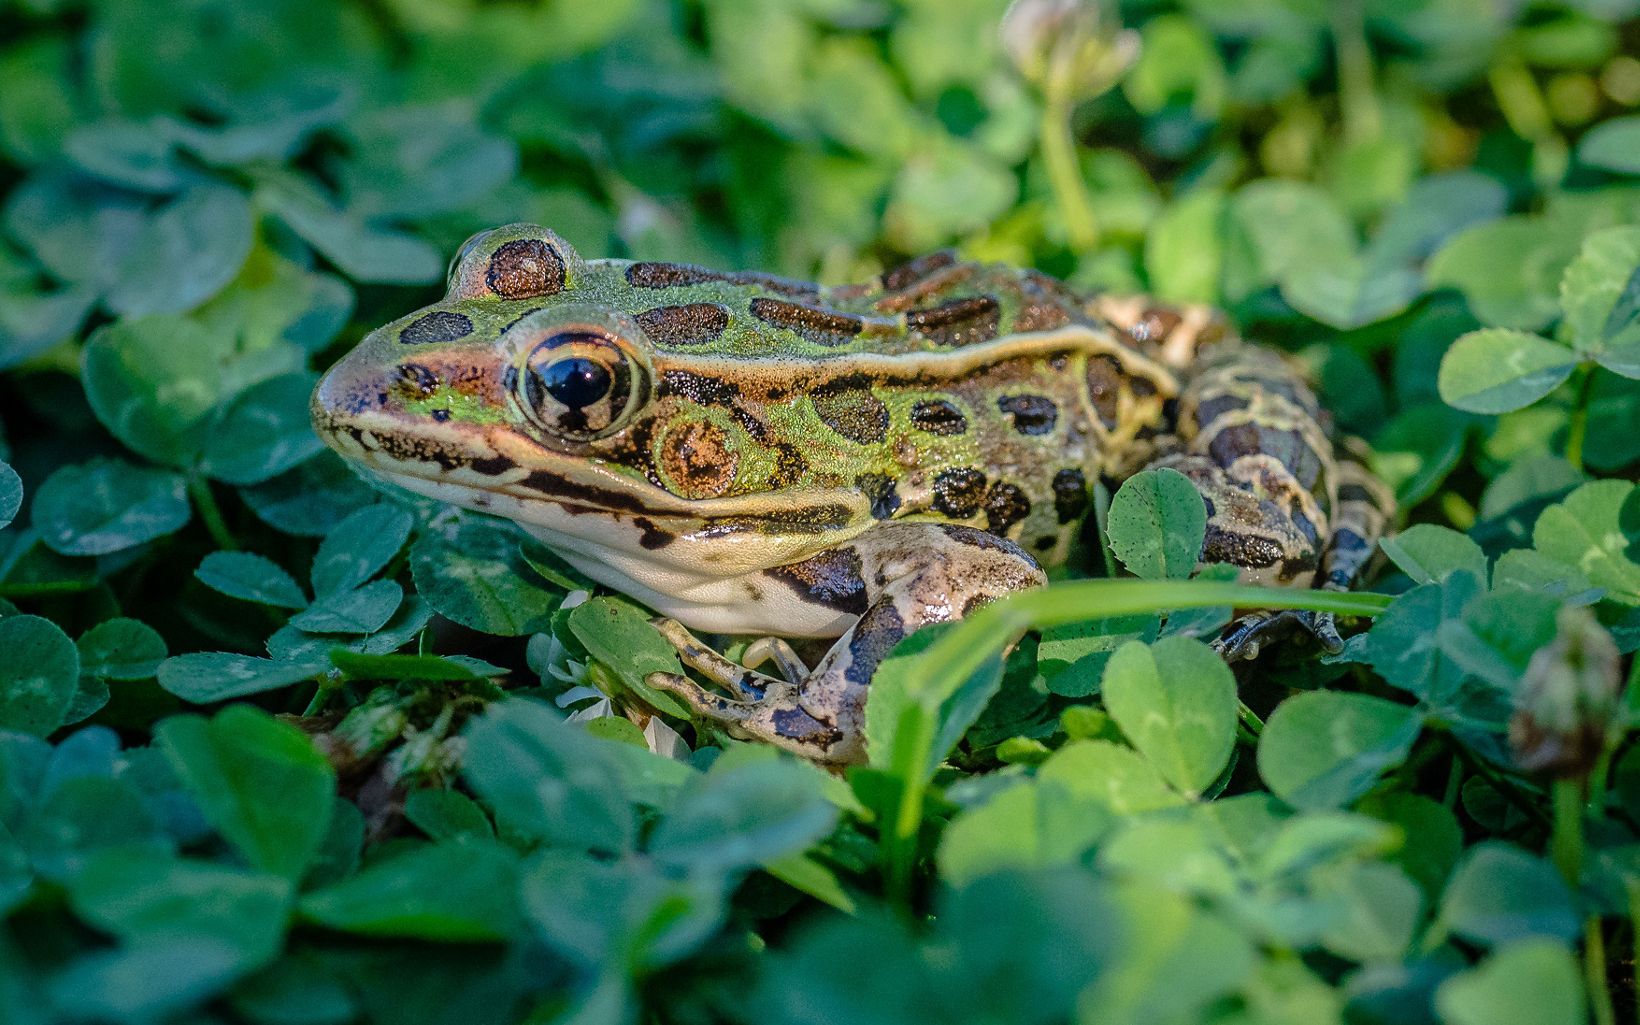 A northern leopard frog sitting within greenery.